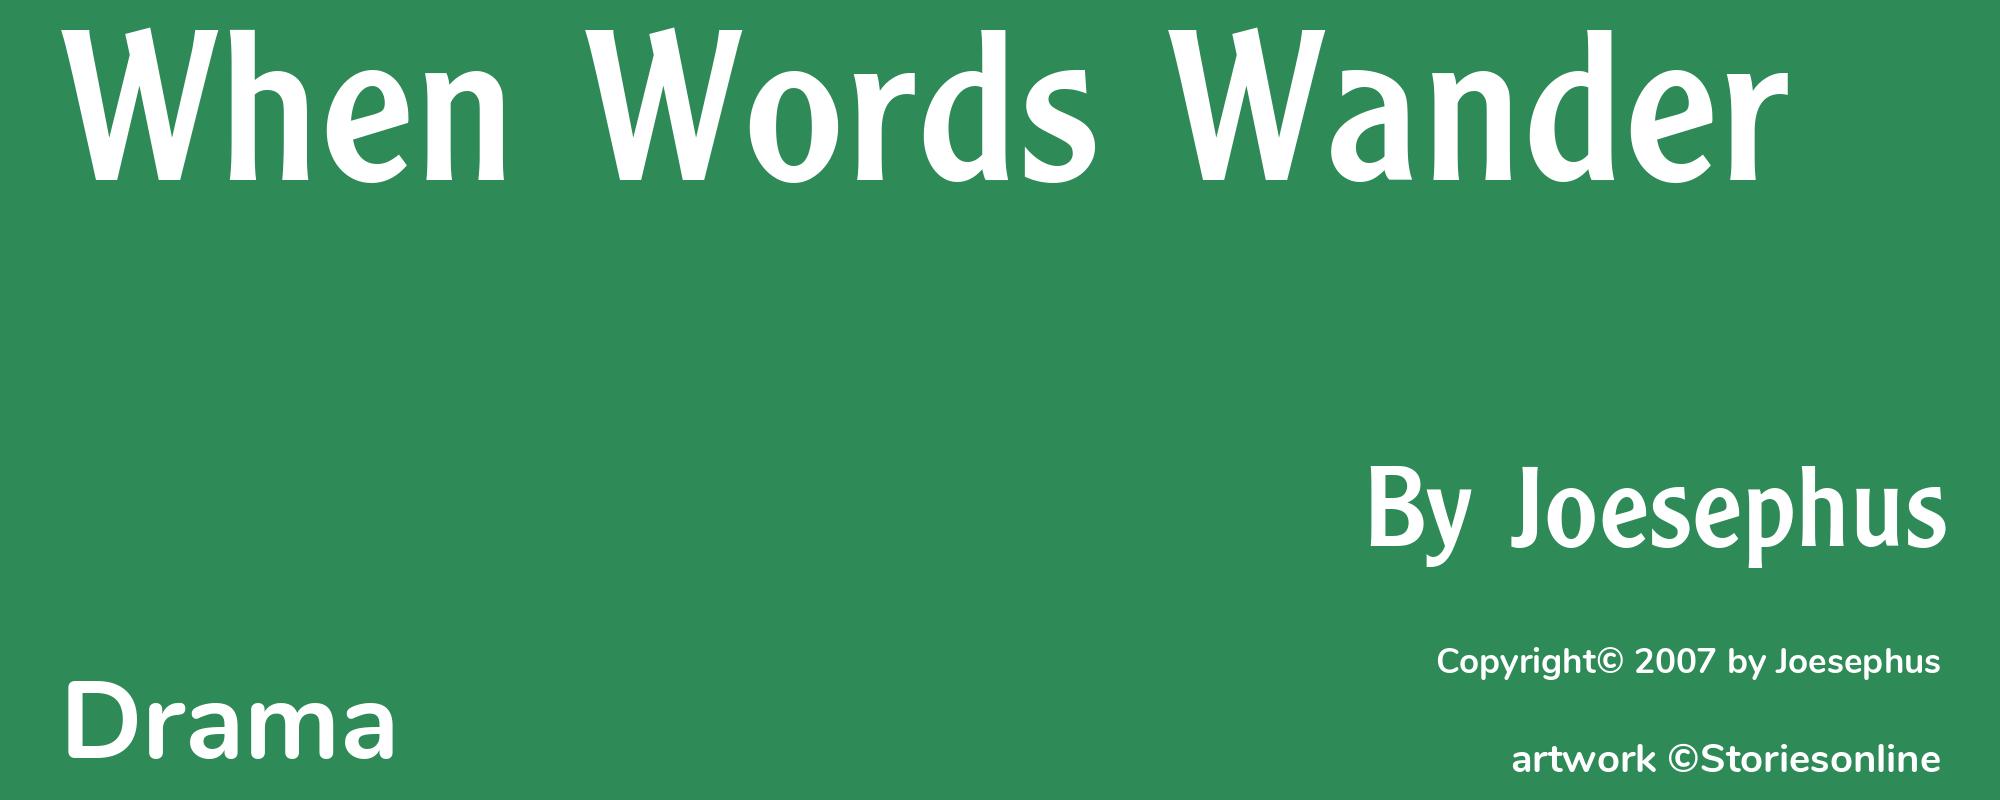 When Words Wander - Cover